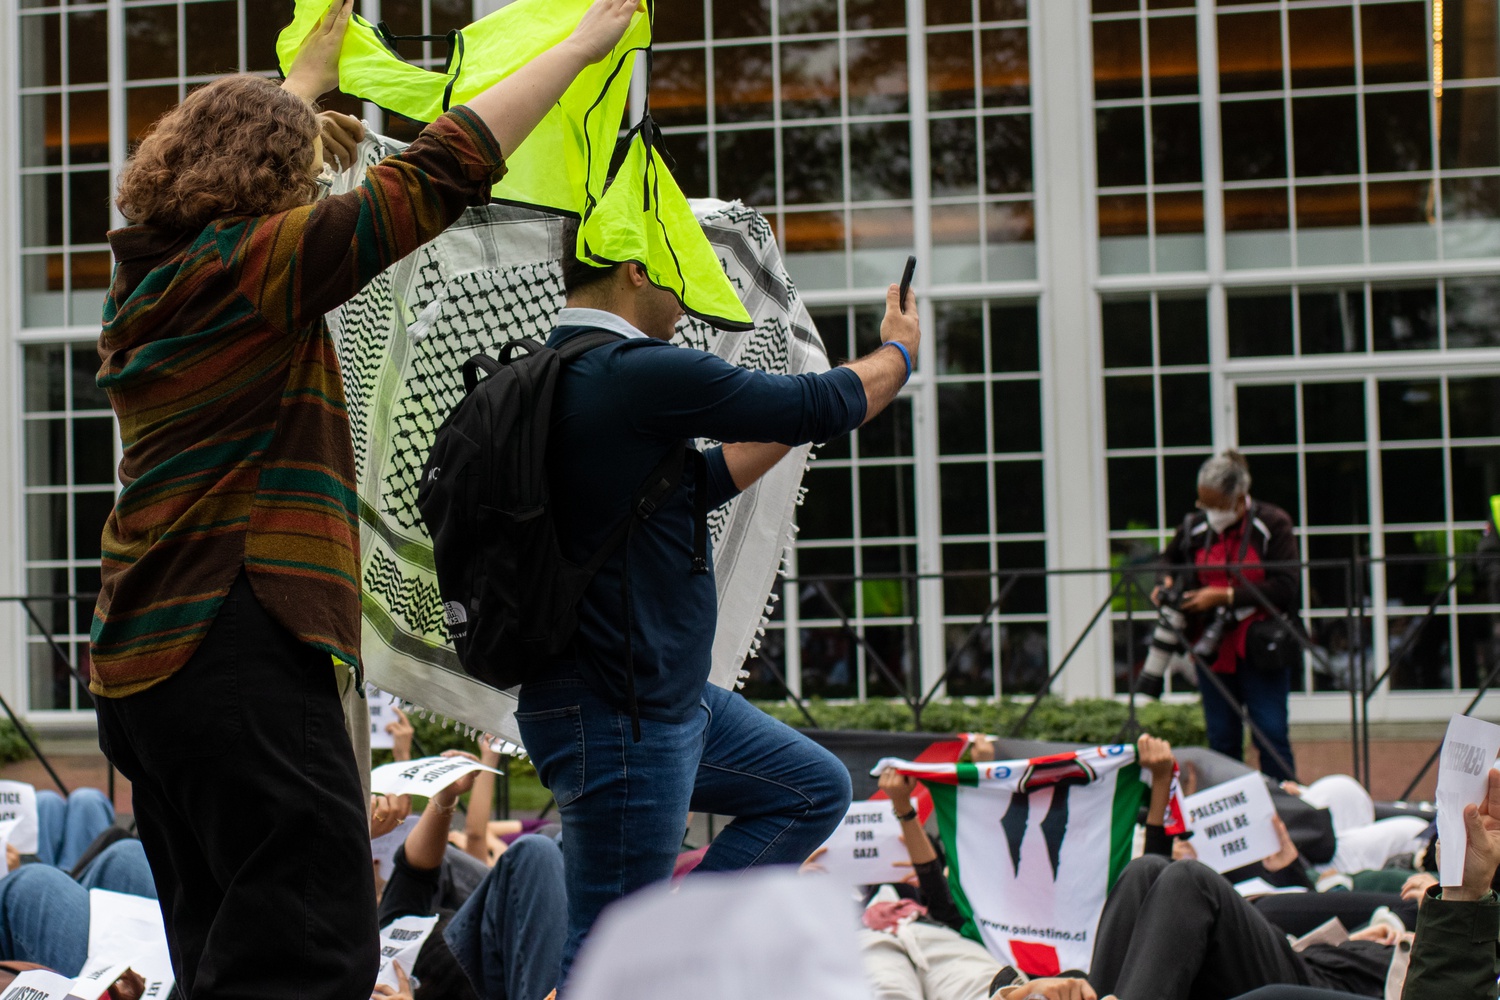 Marshals at an Oct. 18 pro-Palestine "die-in" demonstration attempted to block the camera of a Harvard Business School student who was filming protesters' faces.